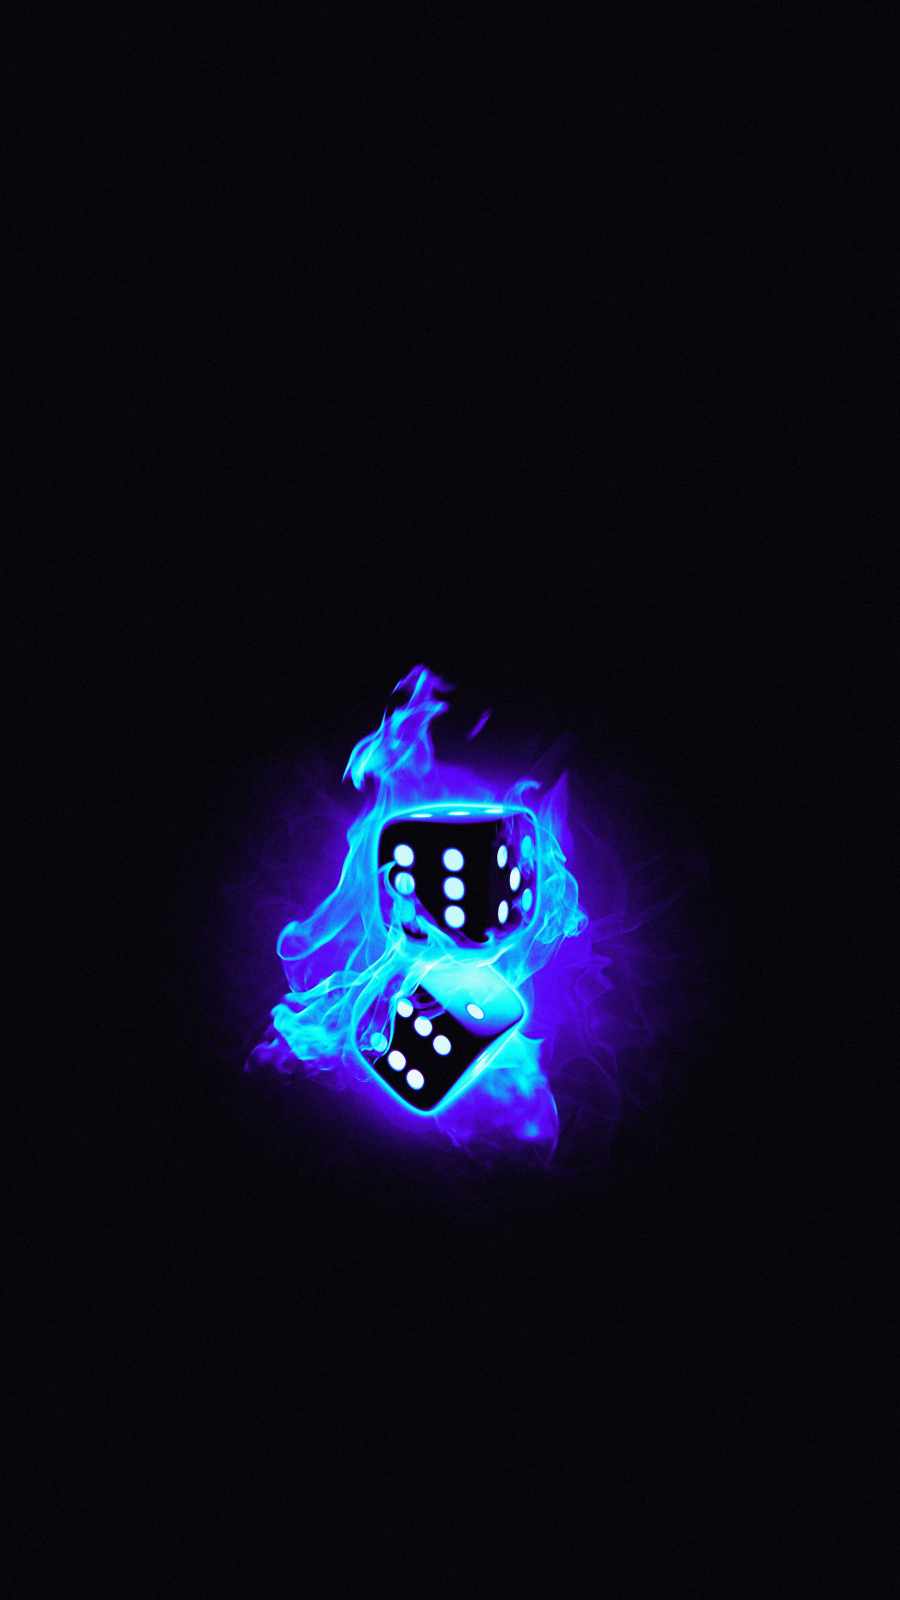 Burning Dices iPhone Wallpaper